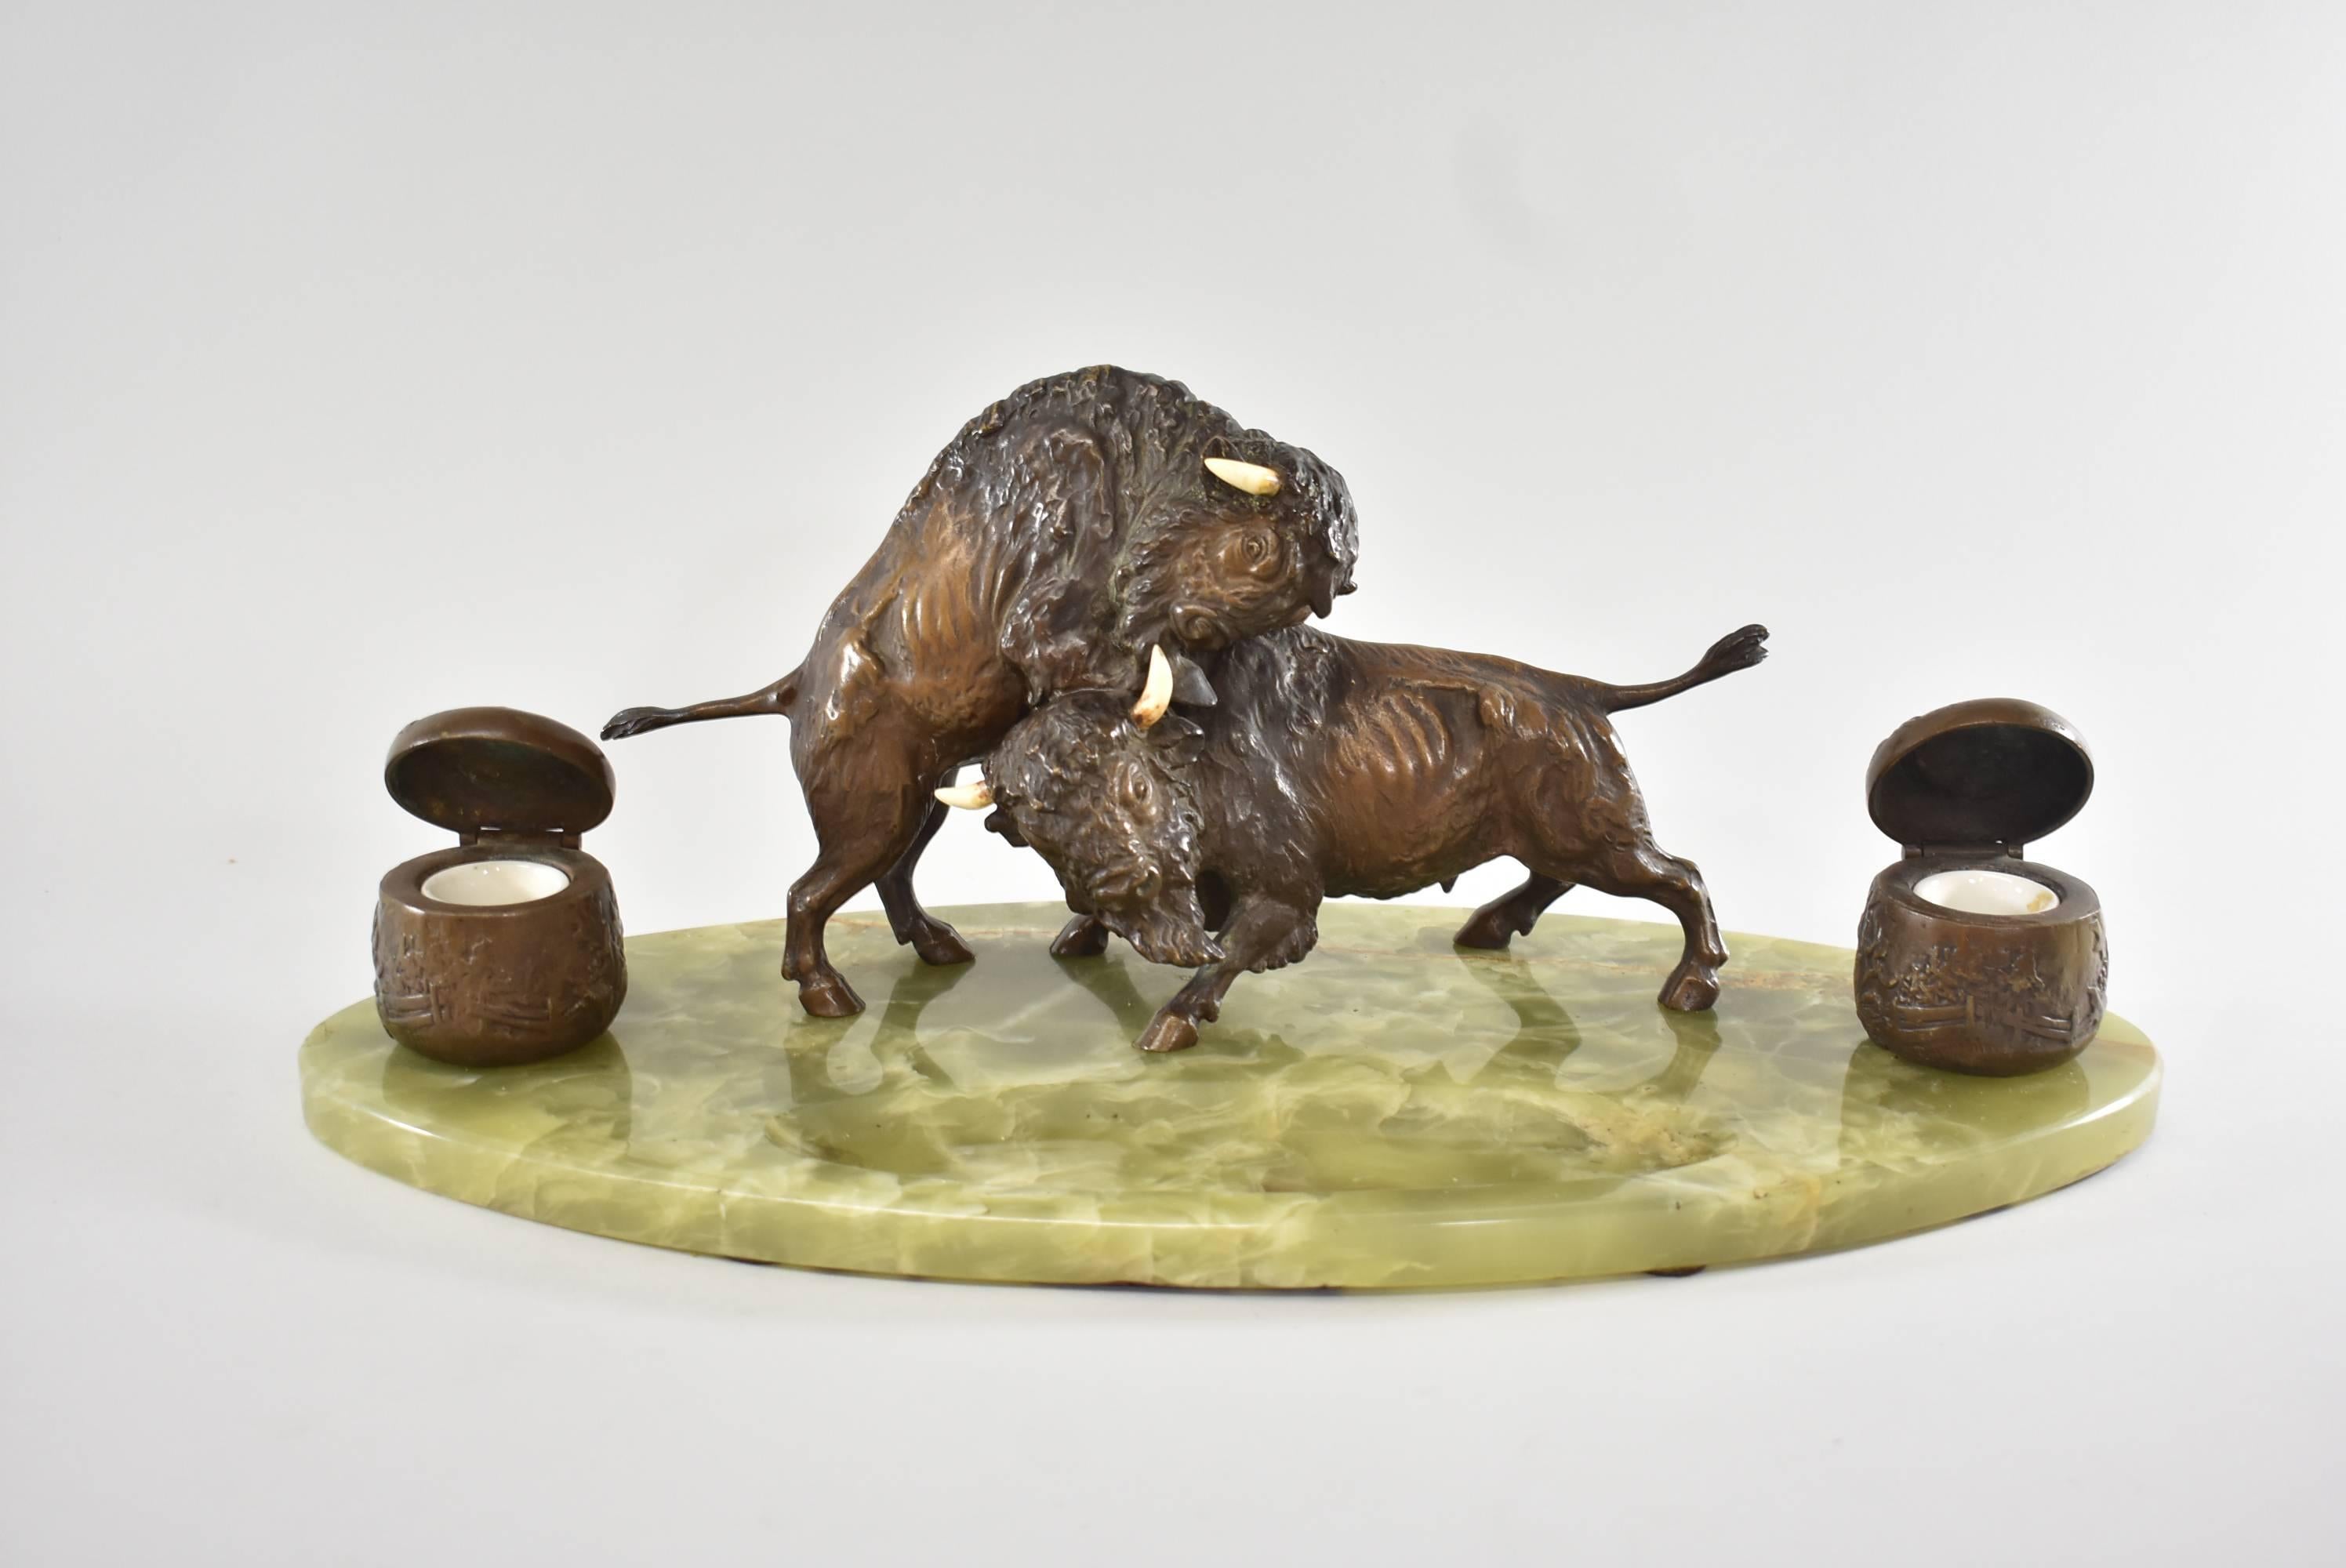 Western inkwell features two cast highly detailed bonze fighting buffalos set on an oval green onyx base with carved out pen rest. The inkwells are embossed with a fenced pastural scene and hold porcelain removable inserts. Nice rich patina. Chip on